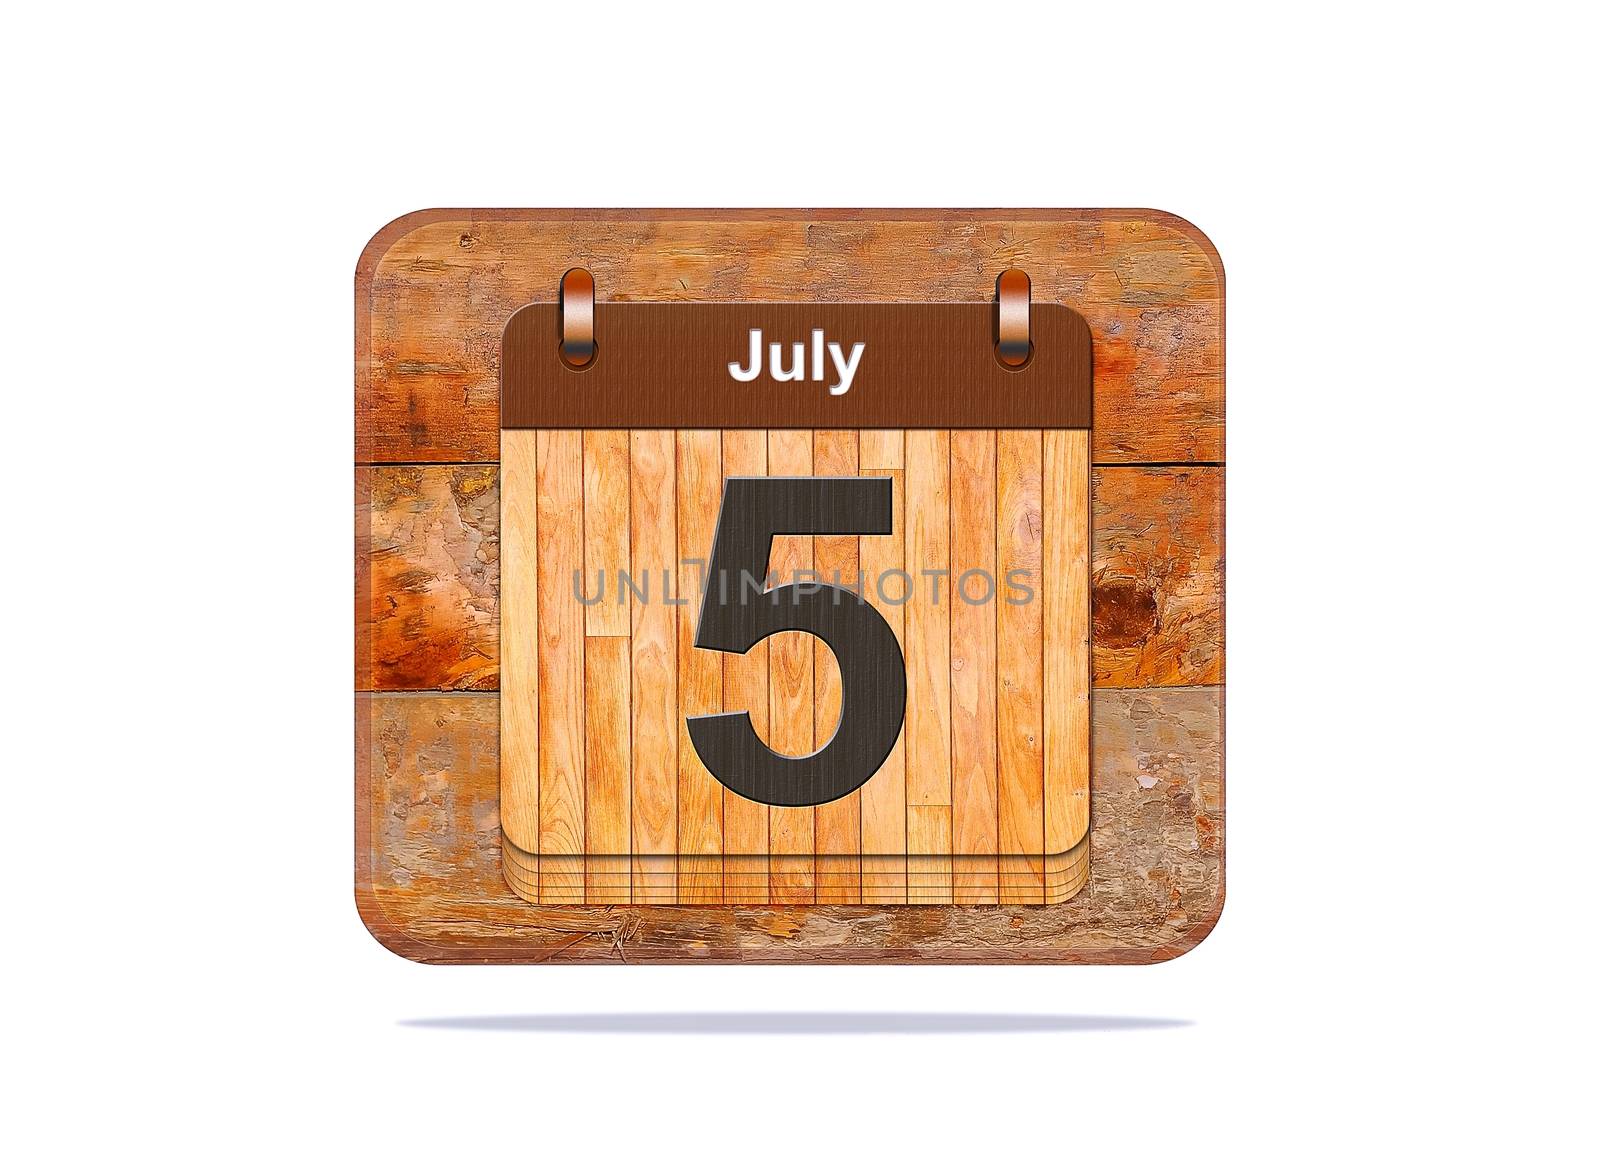 Calendar with the date of July 5.